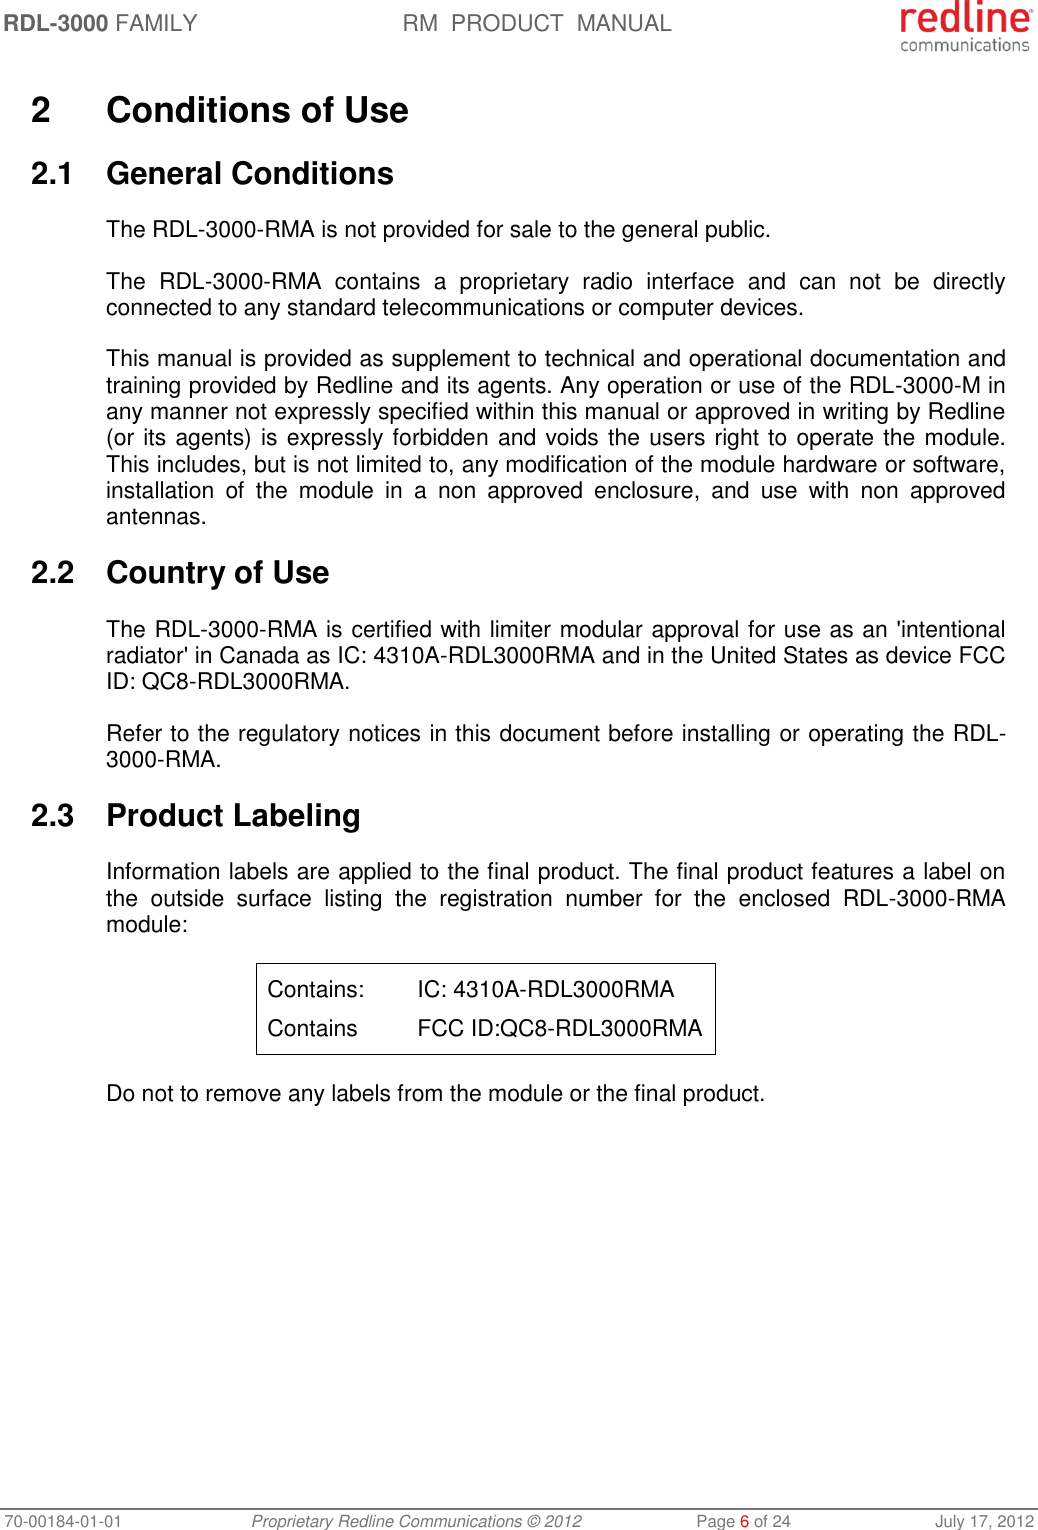 RDL-3000 FAMILY RM  PRODUCT  MANUAL 70-00184-01-01 Proprietary Redline Communications © 2012  Page 6 of 24  July 17, 2012  2  Conditions of Use 2.1  General Conditions The RDL-3000-RMA is not provided for sale to the general public.  The  RDL-3000-RMA  contains  a  proprietary  radio  interface  and  can  not  be  directly connected to any standard telecommunications or computer devices.  This manual is provided as supplement to technical and operational documentation and training provided by Redline and its agents. Any operation or use of the RDL-3000-M in any manner not expressly specified within this manual or approved in writing by Redline (or its agents) is expressly forbidden and voids the users right to operate the module.  This includes, but is not limited to, any modification of the module hardware or software, installation  of  the  module  in  a  non  approved  enclosure,  and  use  with  non  approved antennas. 2.2  Country of Use The RDL-3000-RMA is certified with limiter modular approval for use as an &apos;intentional radiator&apos; in Canada as IC: 4310A-RDL3000RMA and in the United States as device FCC ID: QC8-RDL3000RMA. Refer to the regulatory notices in this document before installing or operating the RDL-3000-RMA. 2.3  Product Labeling Information labels are applied to the final product. The final product features a label on the  outside  surface  listing  the  registration  number  for  the  enclosed  RDL-3000-RMA module: Contains:  IC: 4310A-RDL3000RMA Contains  FCC ID:QC8-RDL3000RMA Do not to remove any labels from the module or the final product. 